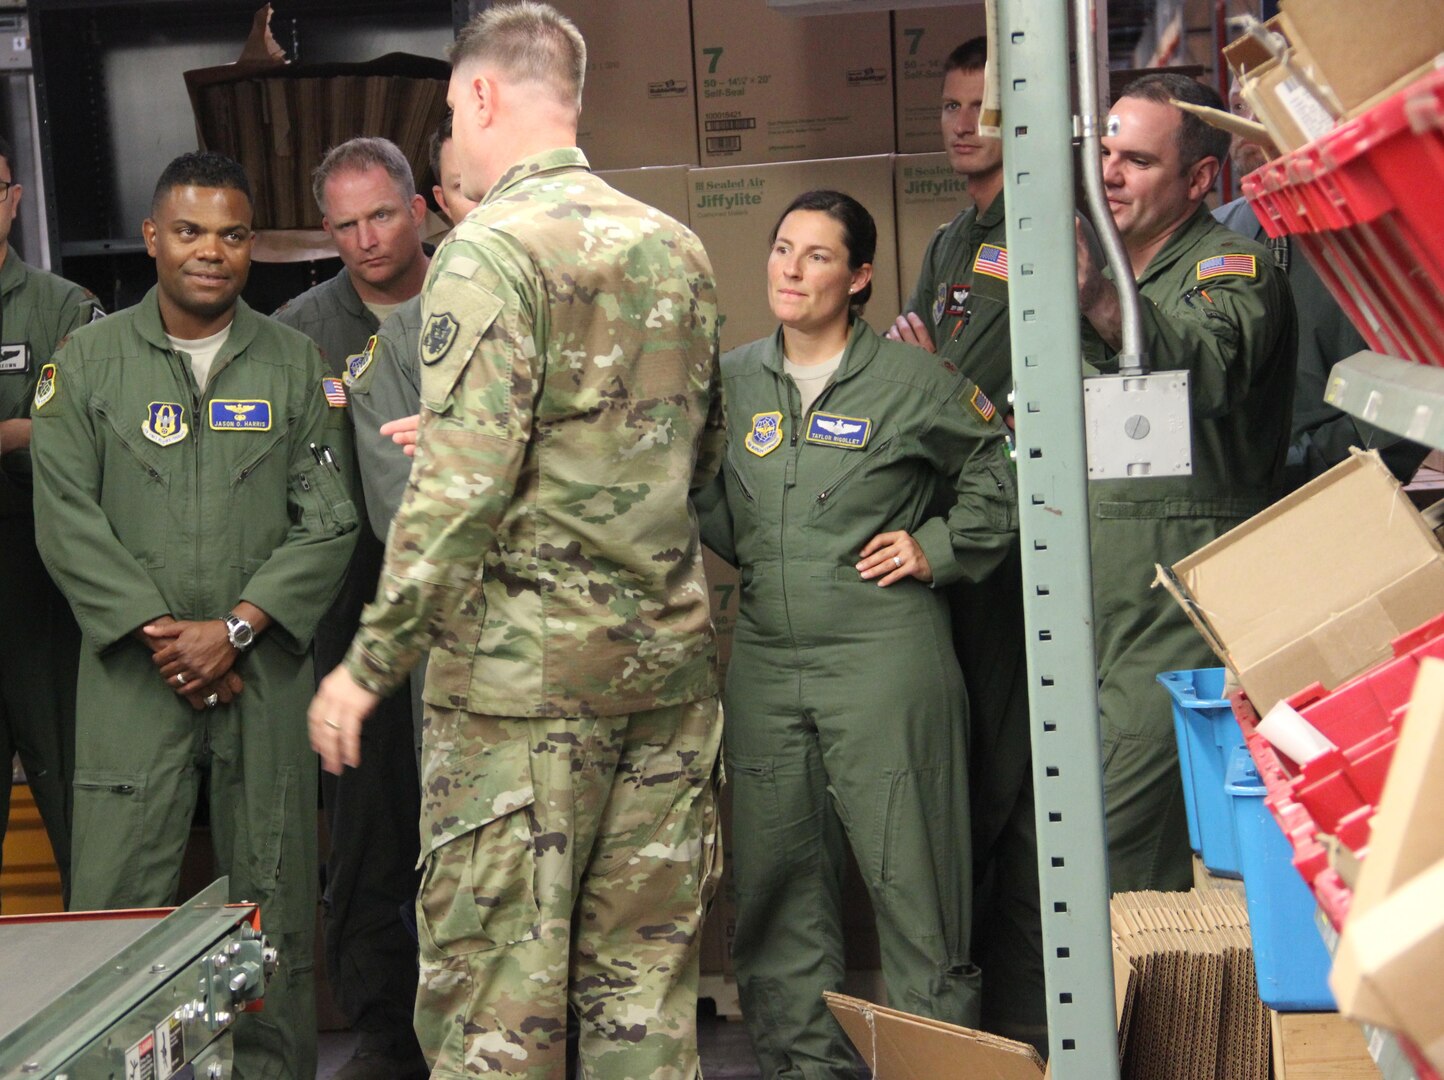 Students in the Advanced Study of Air Mobility Program from USAF Expeditionary Center, Joint Base McGuire-Dix-Lakehurst, N.J. receive a tour of DoD’s largest warehouse from United States Army Lt. Col. Jacob Freeman. 